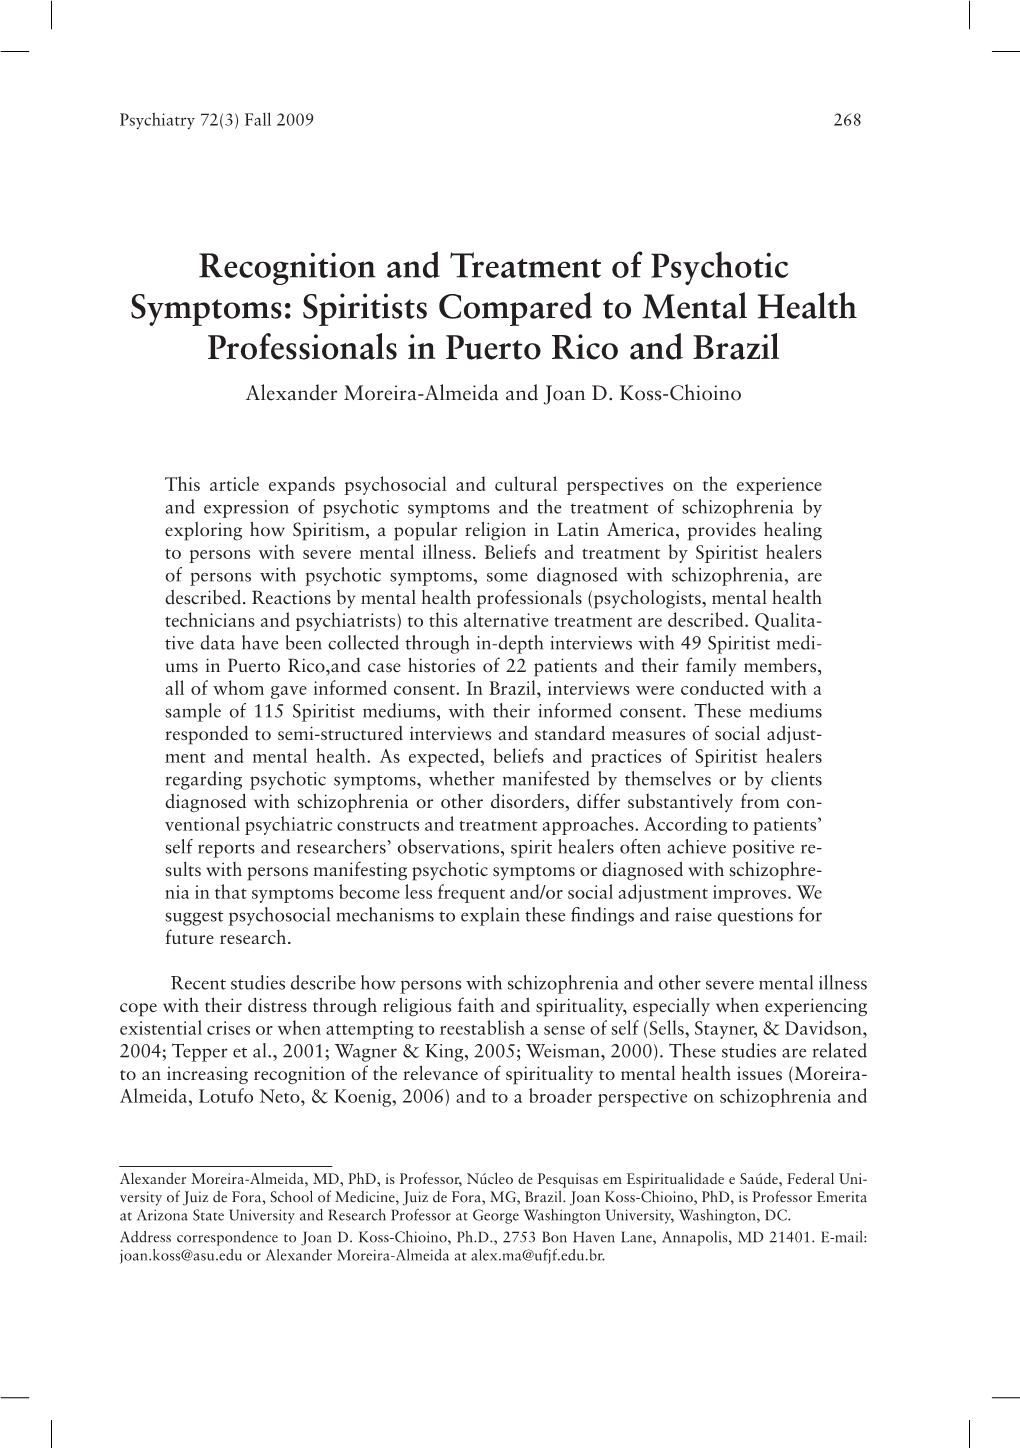 Spiritists Compared to Mental Health Professionals in Puerto Rico and Brazil Alexander Moreira-Almeida and Joan D